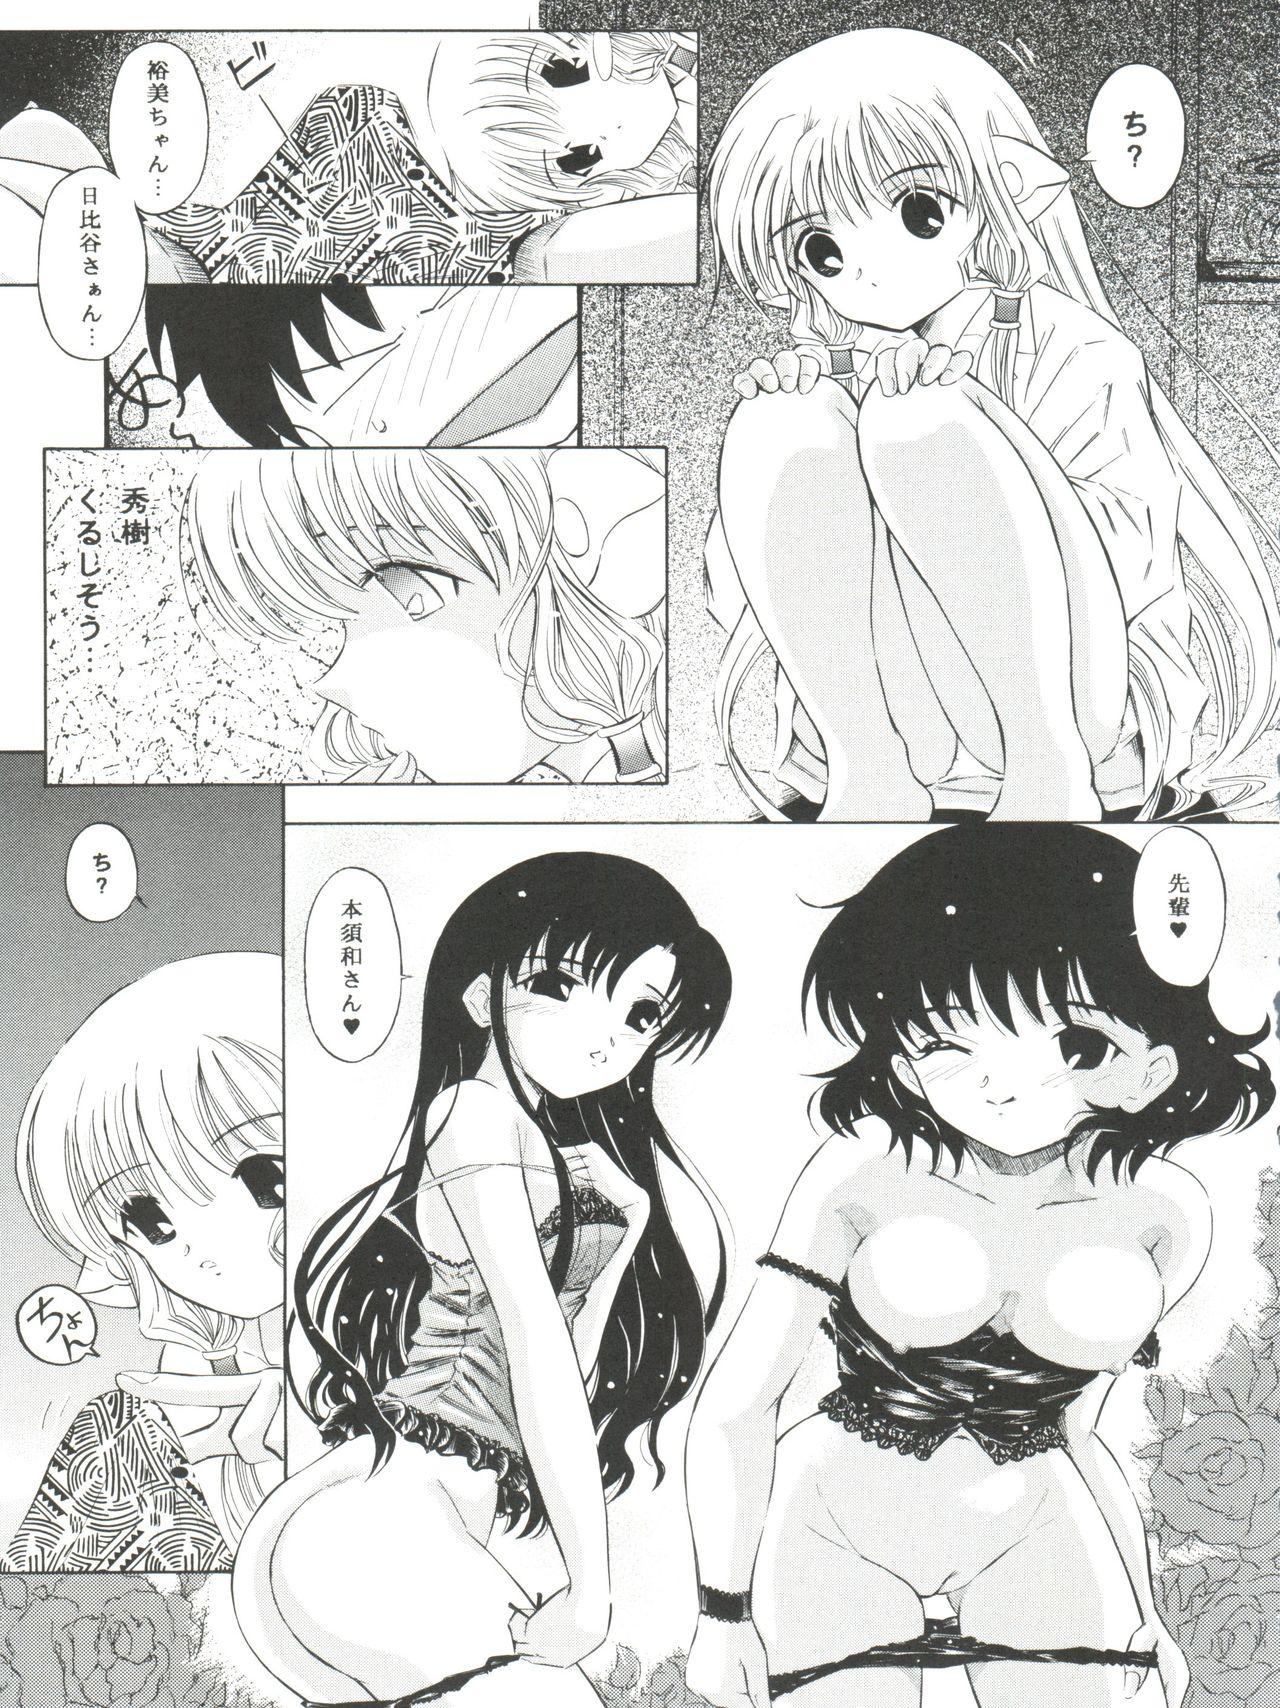 Officesex Tricolor - Cardcaptor sakura Chobits Angelic layer Amature - Page 9